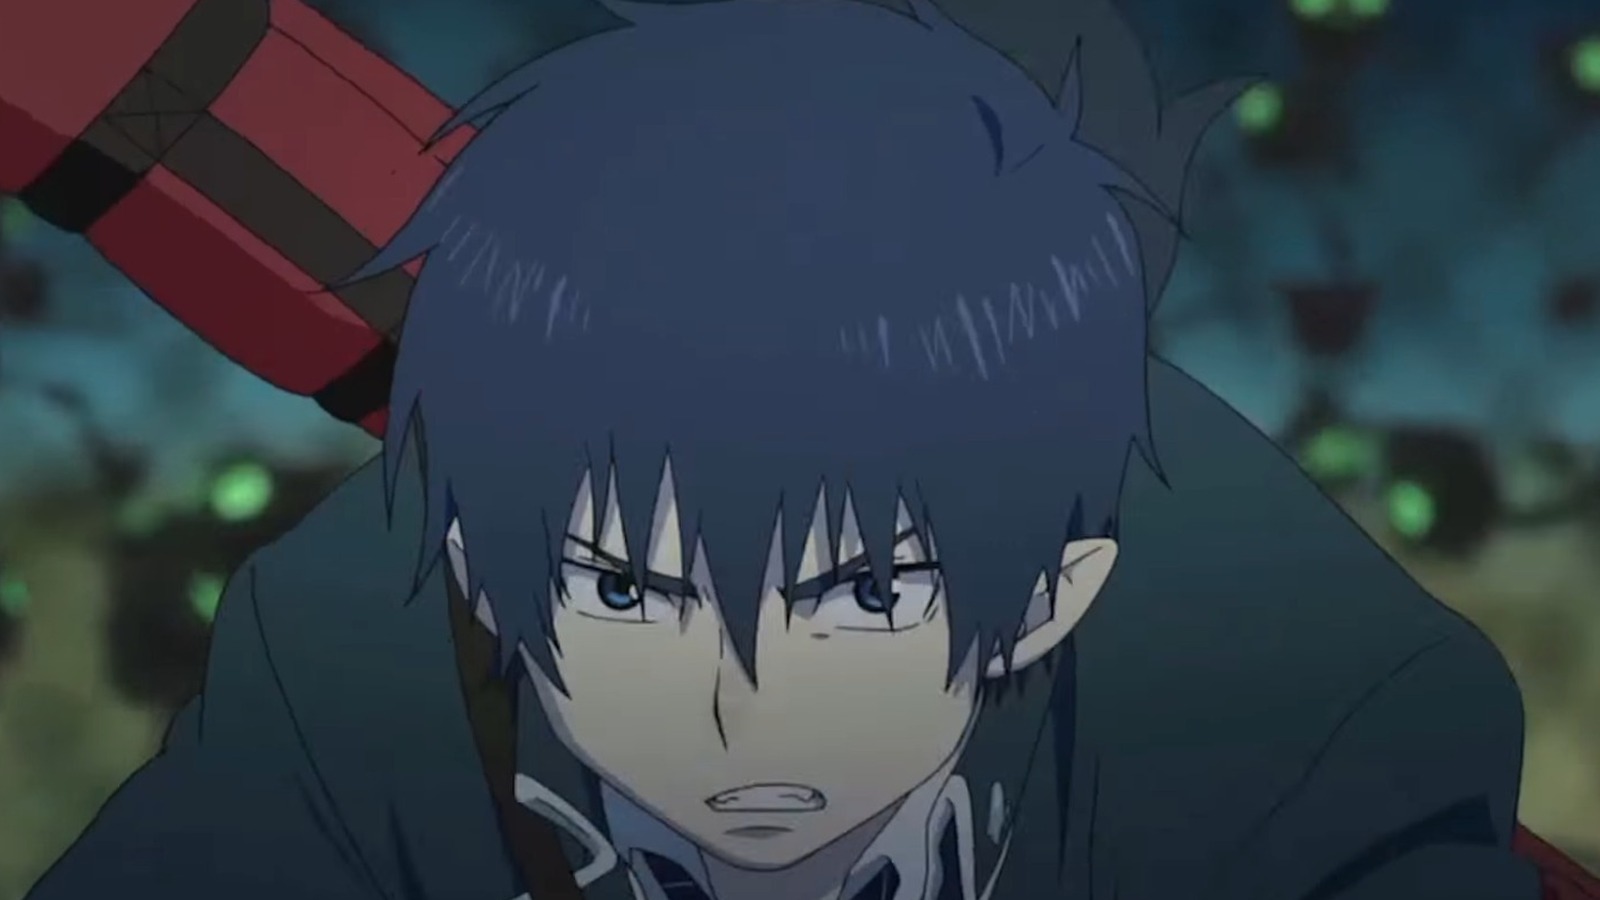 Anime Return of the Okumura Brothers  Character and Story Review of Blue  Exorcist  Kyoto Saga Anime  Japanese kawaii idol music culture news   Tokyo Girls Update